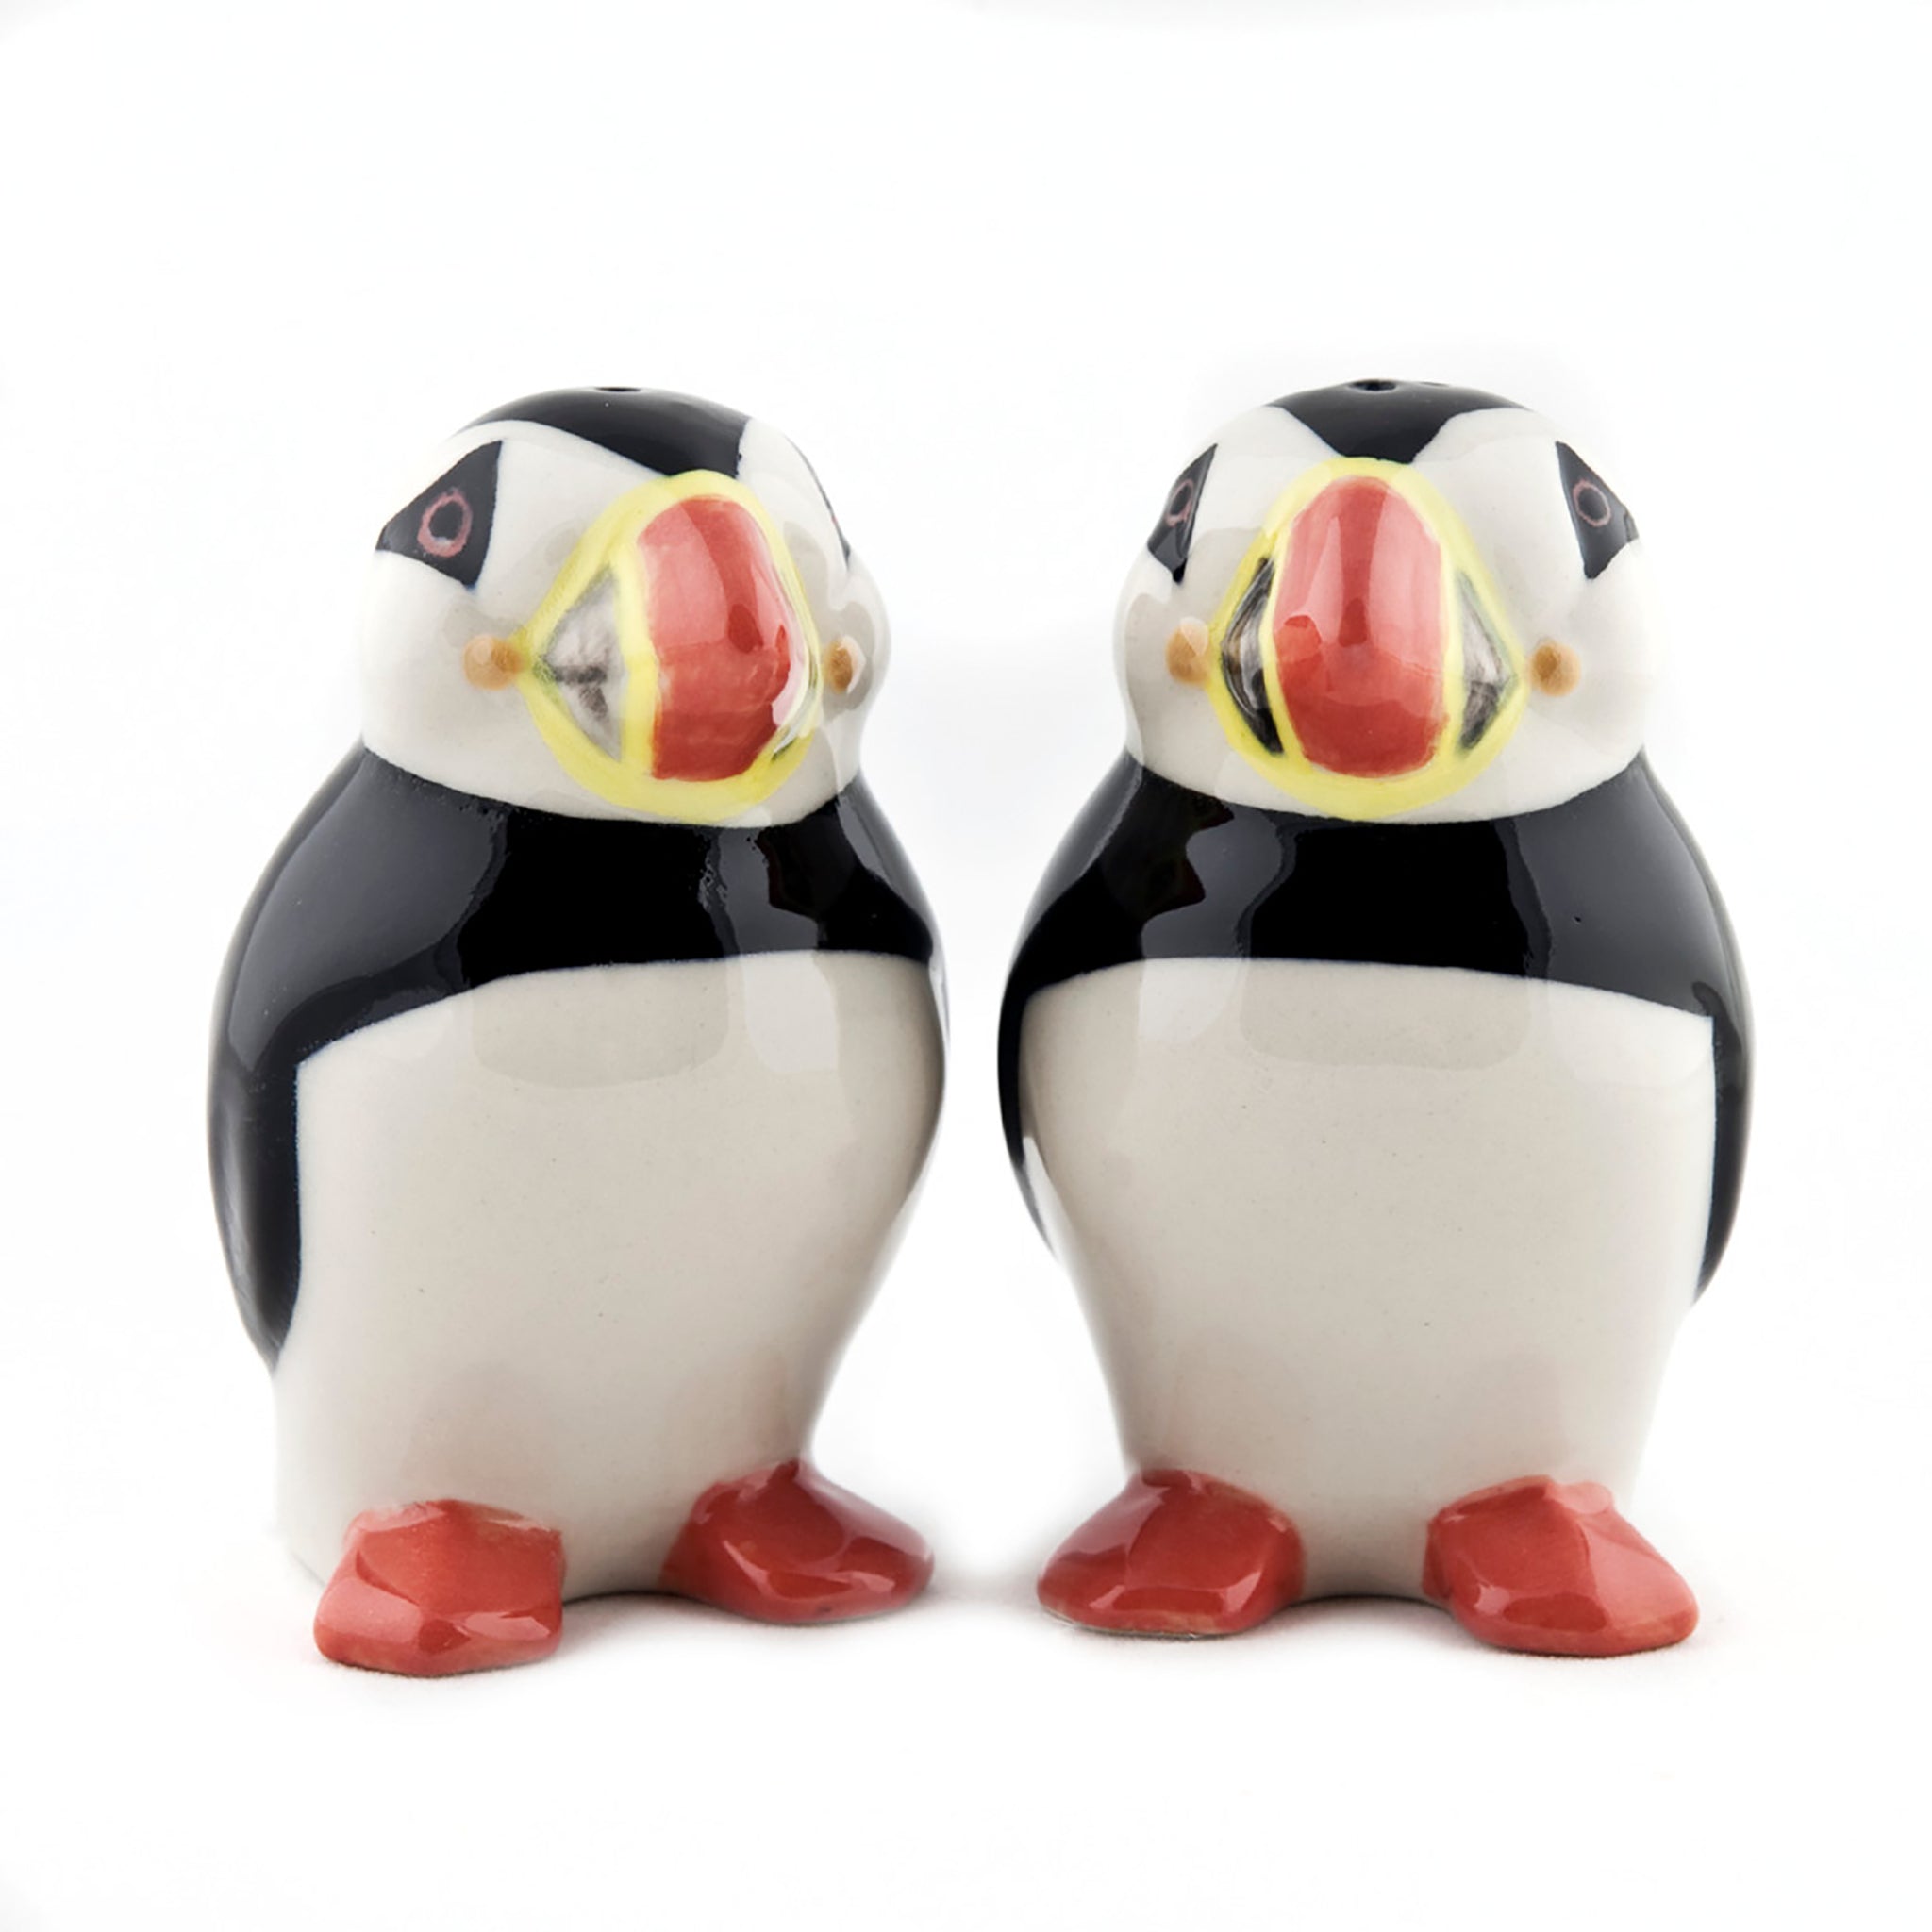 Pair of glazed salt and pepper shakers shaped like puffins front view